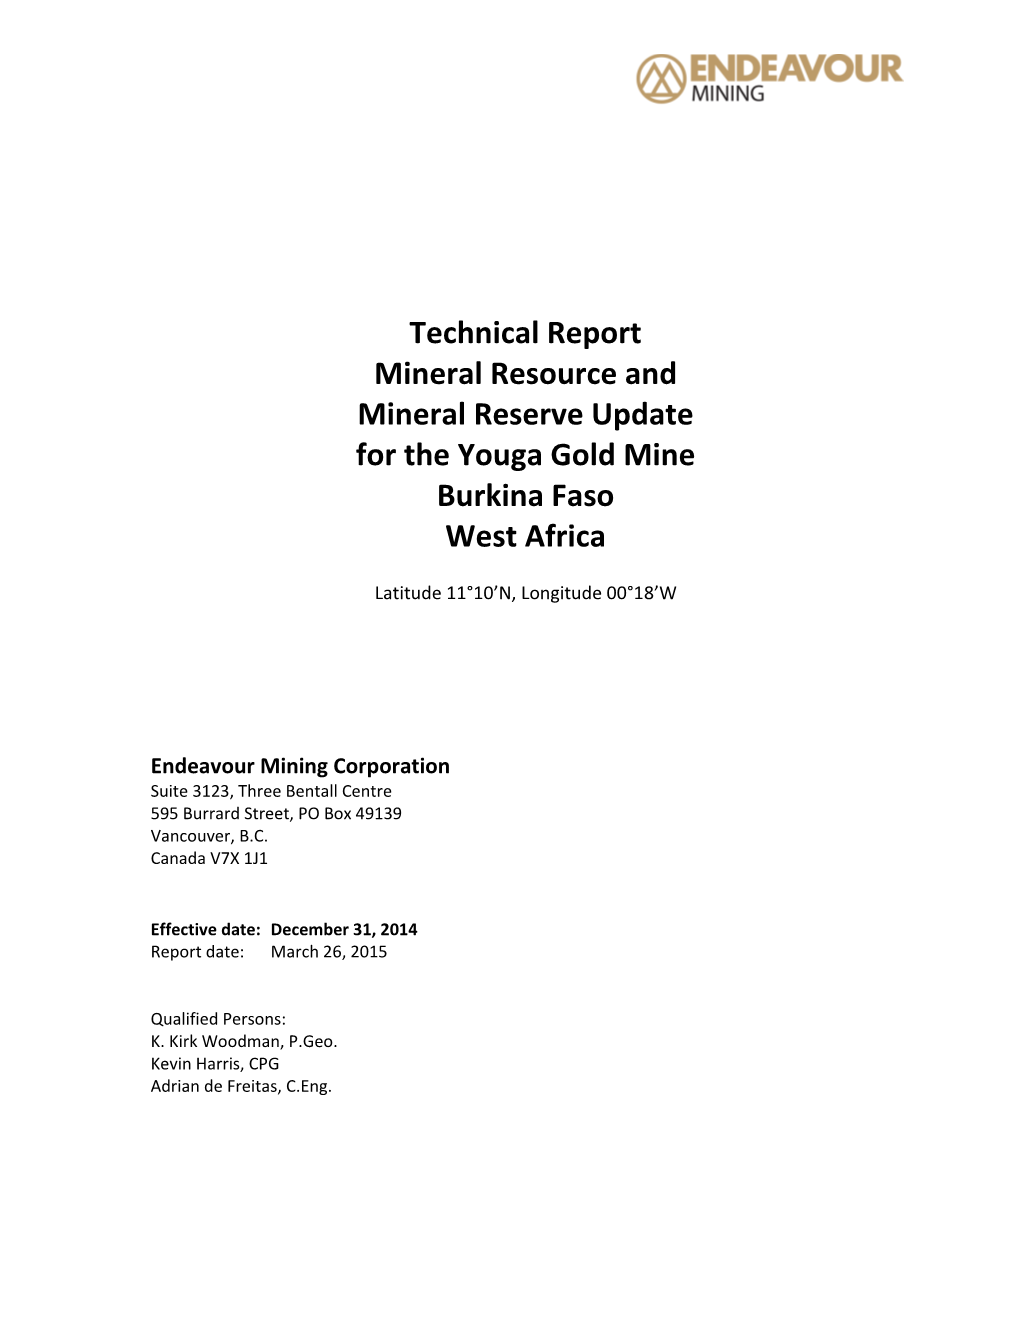 Technical Report Mineral Resource and Mineral Reserve Update for the Youga Gold Mine Burkina Faso West Africa